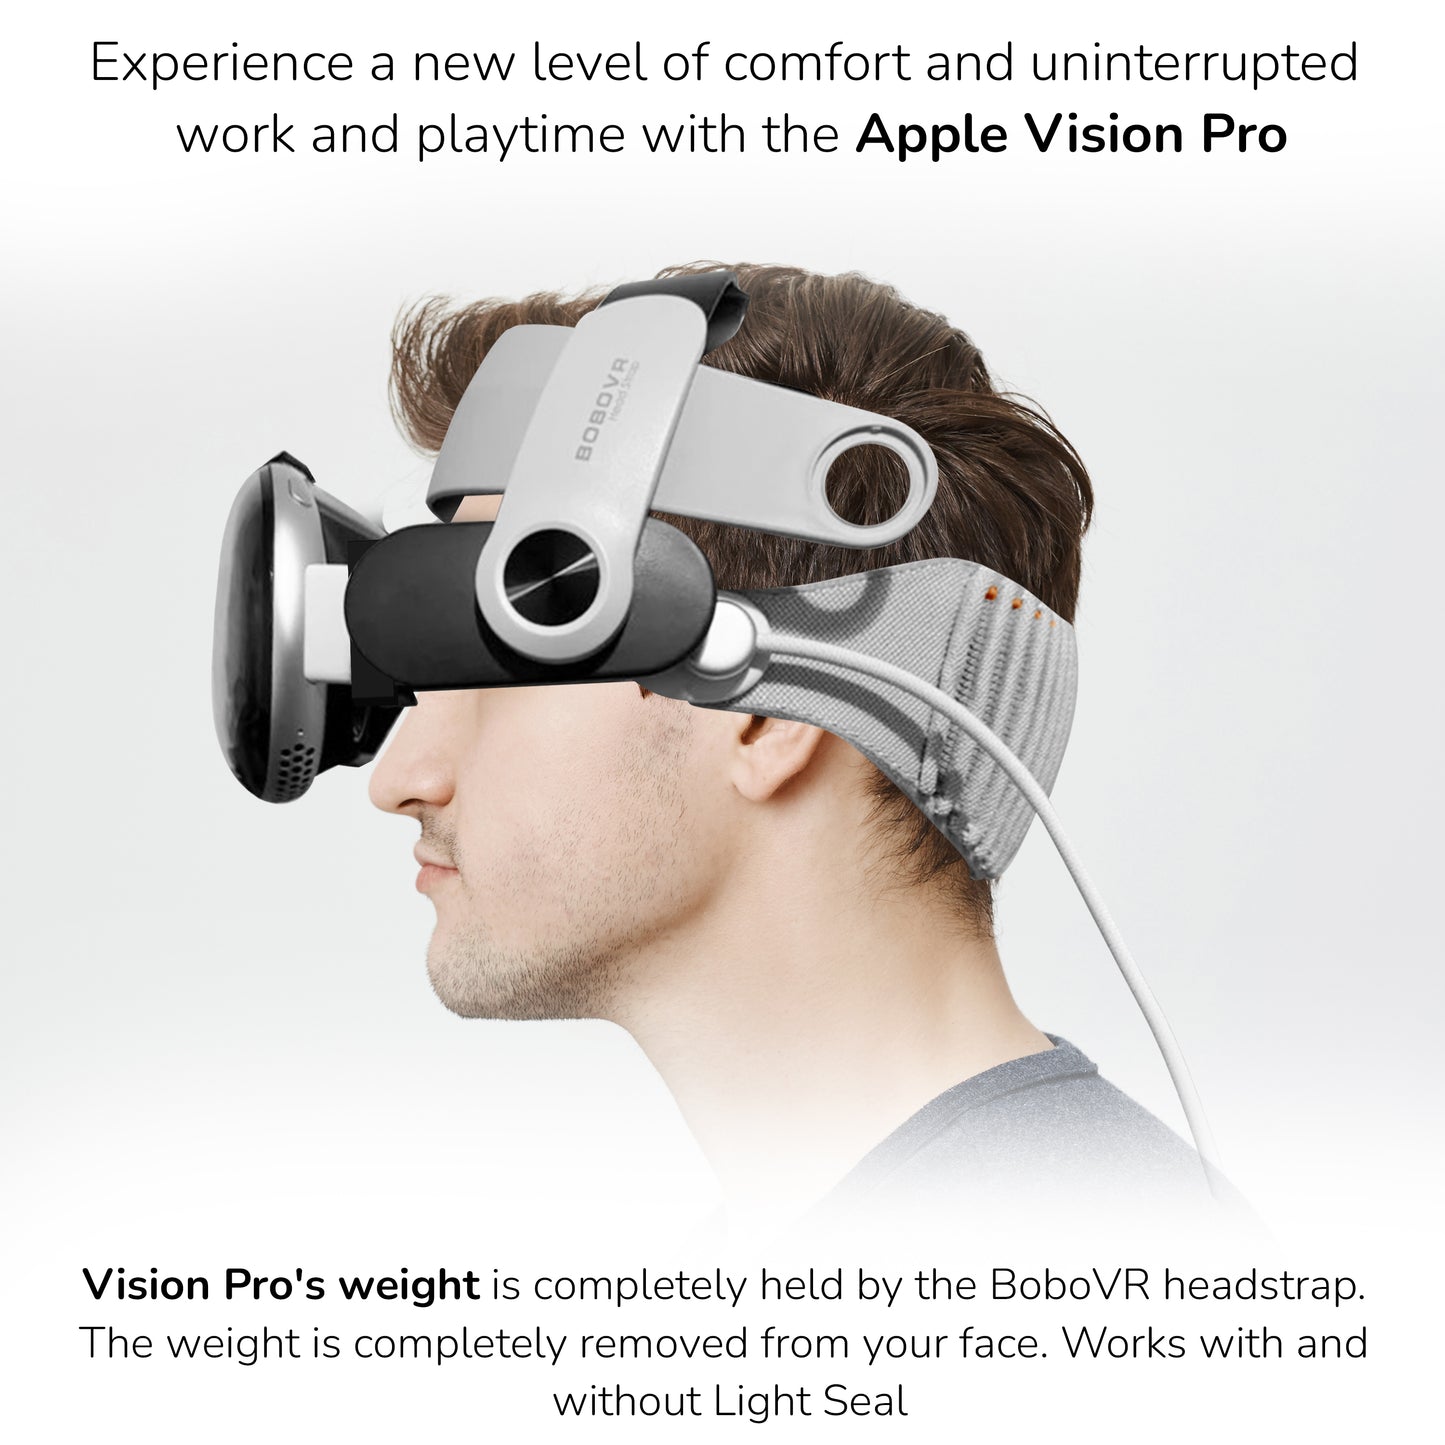 BoboVR headset with ergonomic comfort adapter showcasing good comfort and no face pressure features